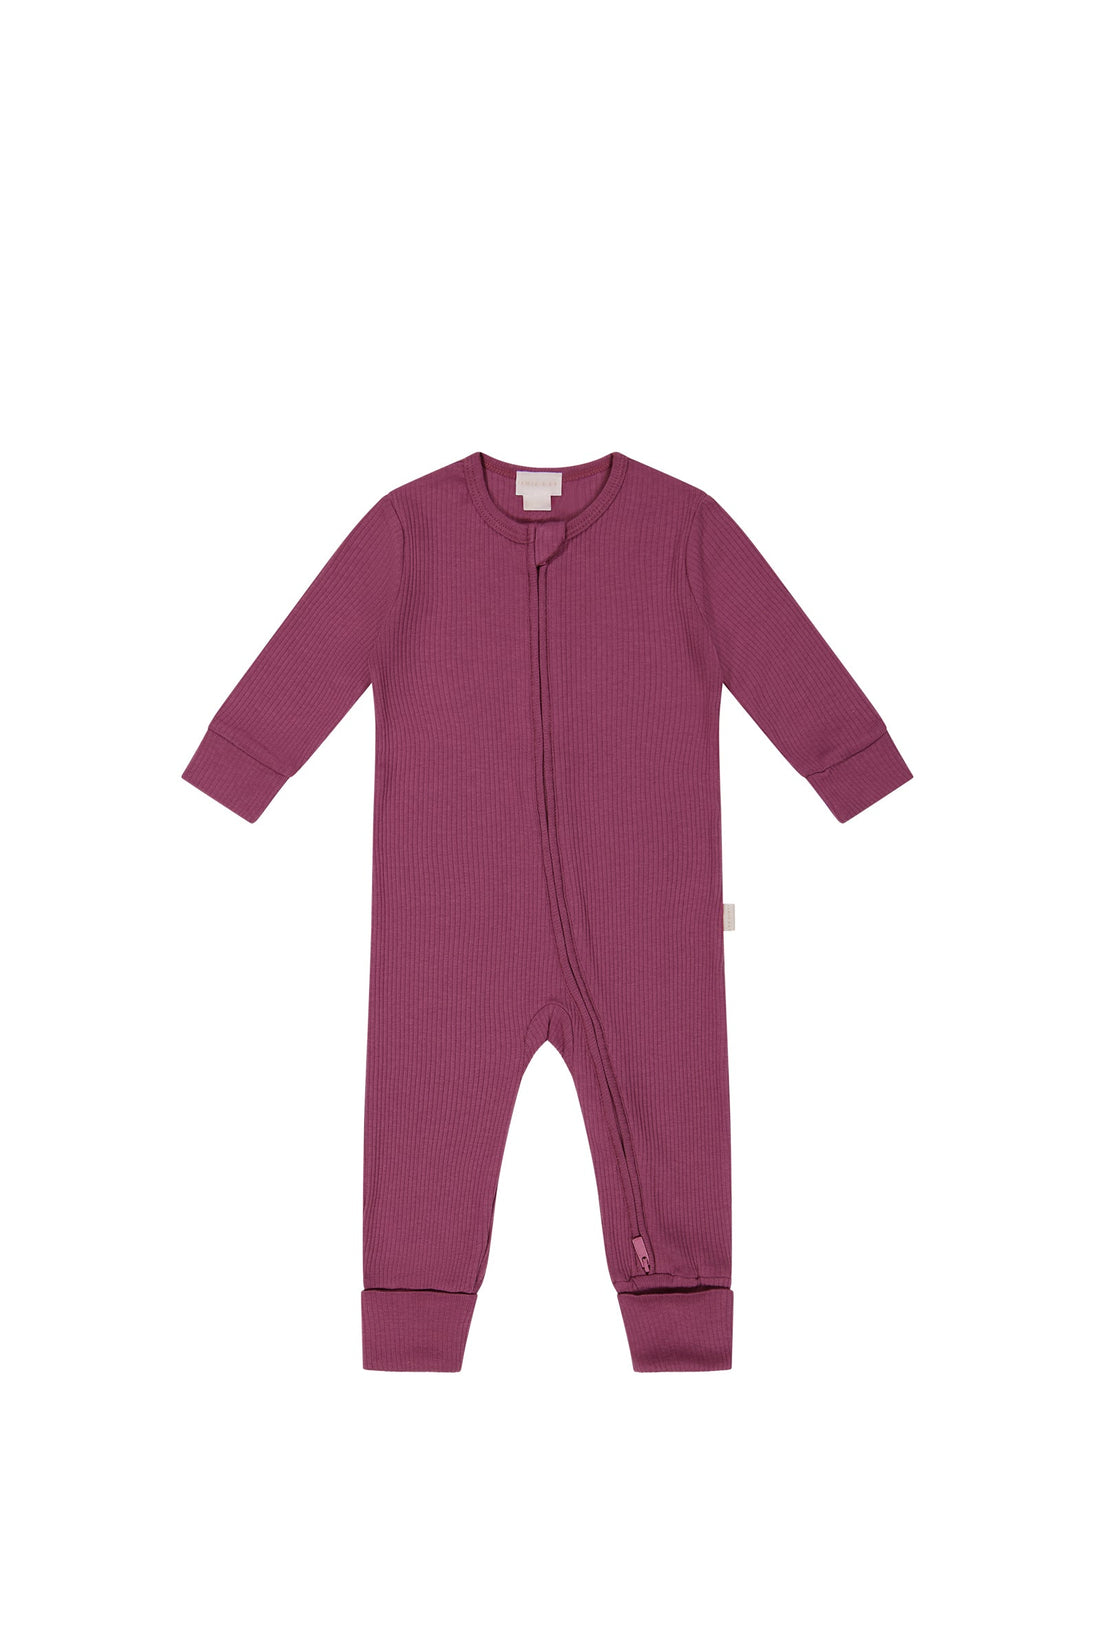 Organic Cotton Modal Frankie Onepiece - Berry Compote Childrens Onepiece from Jamie Kay USA